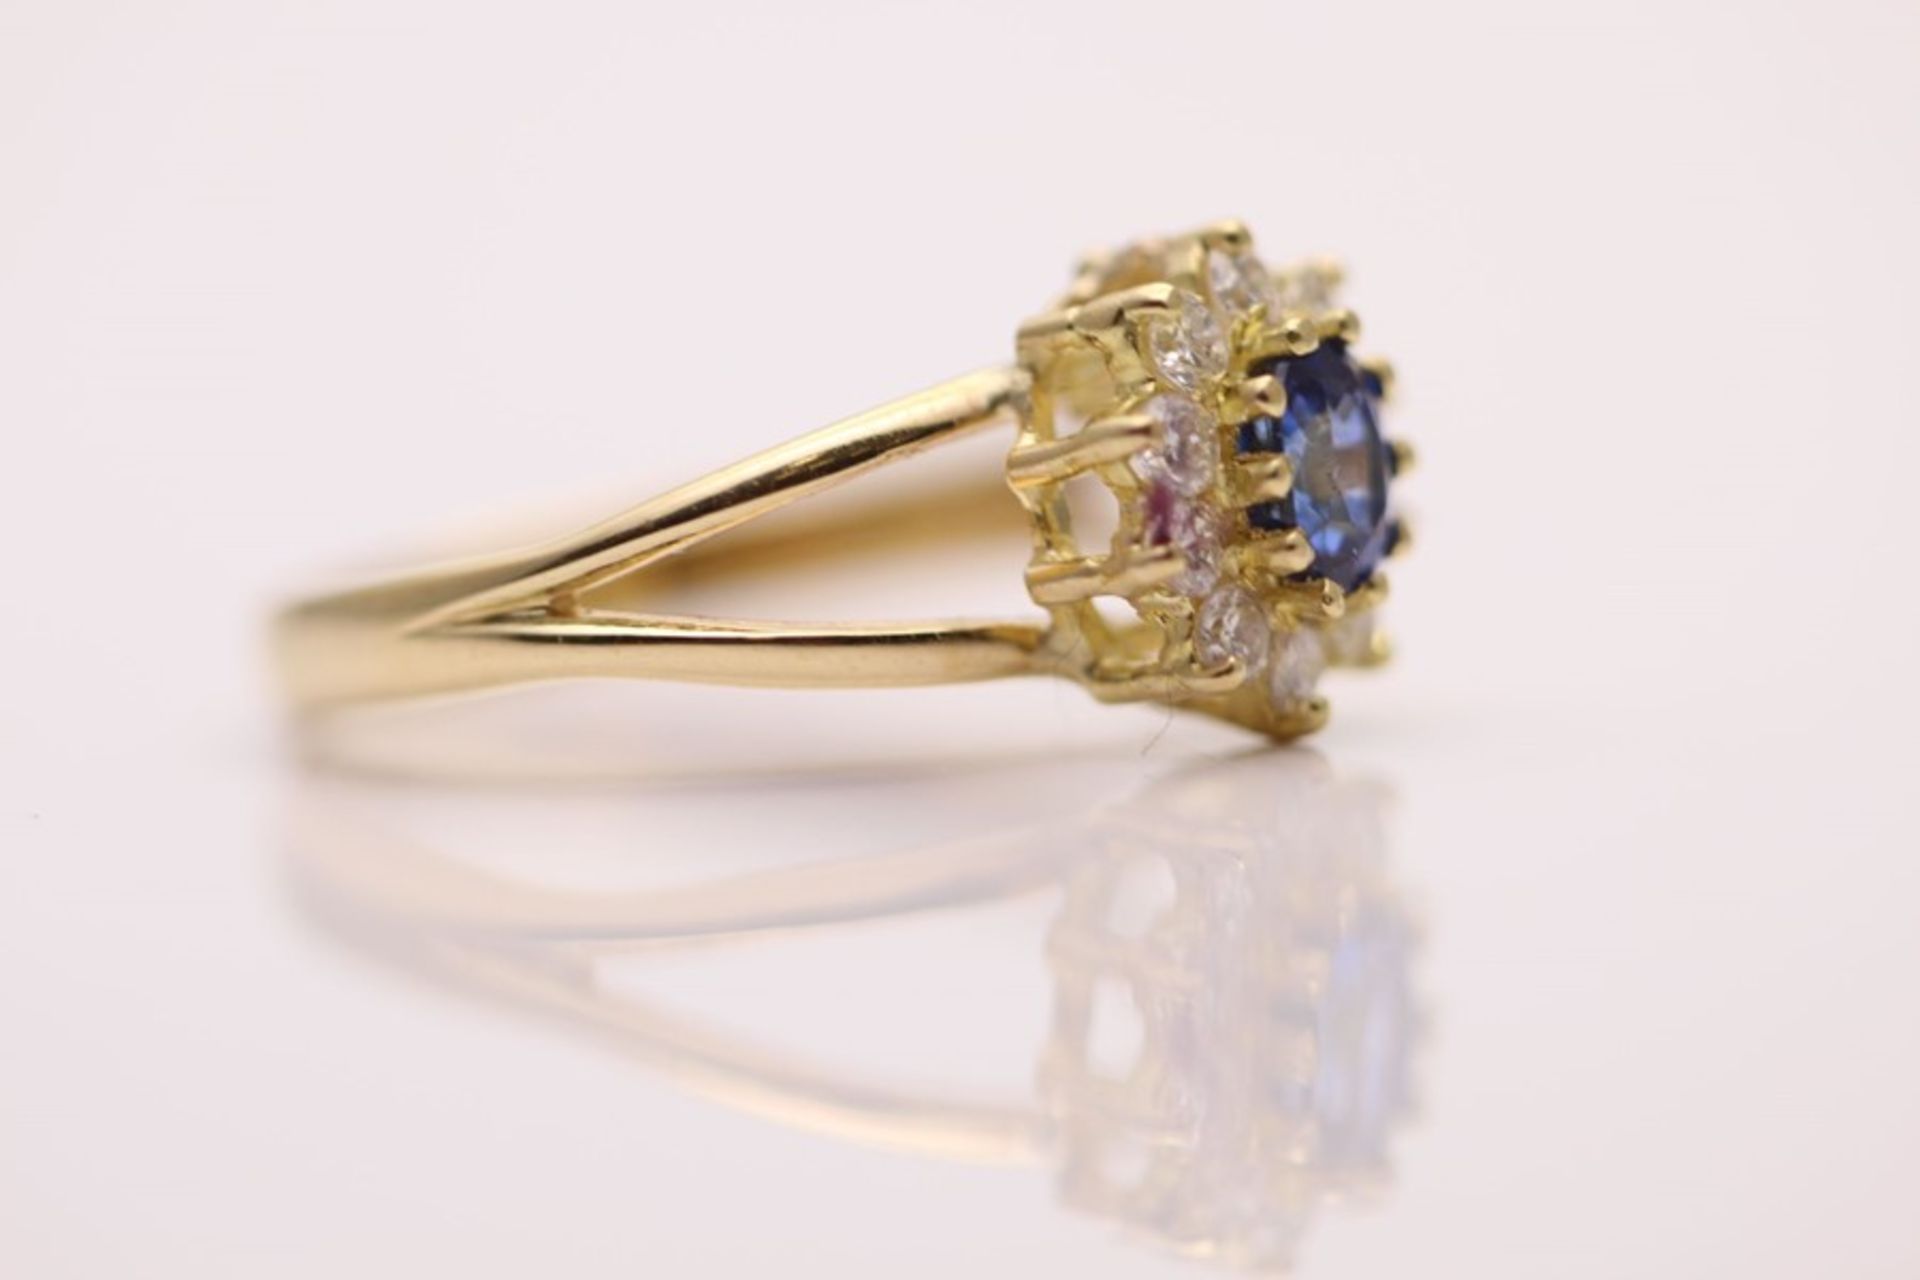 LADIES YELLOW GOLD DIAMOND AND SAPPHIRE CLUSTER RING - Image 2 of 4